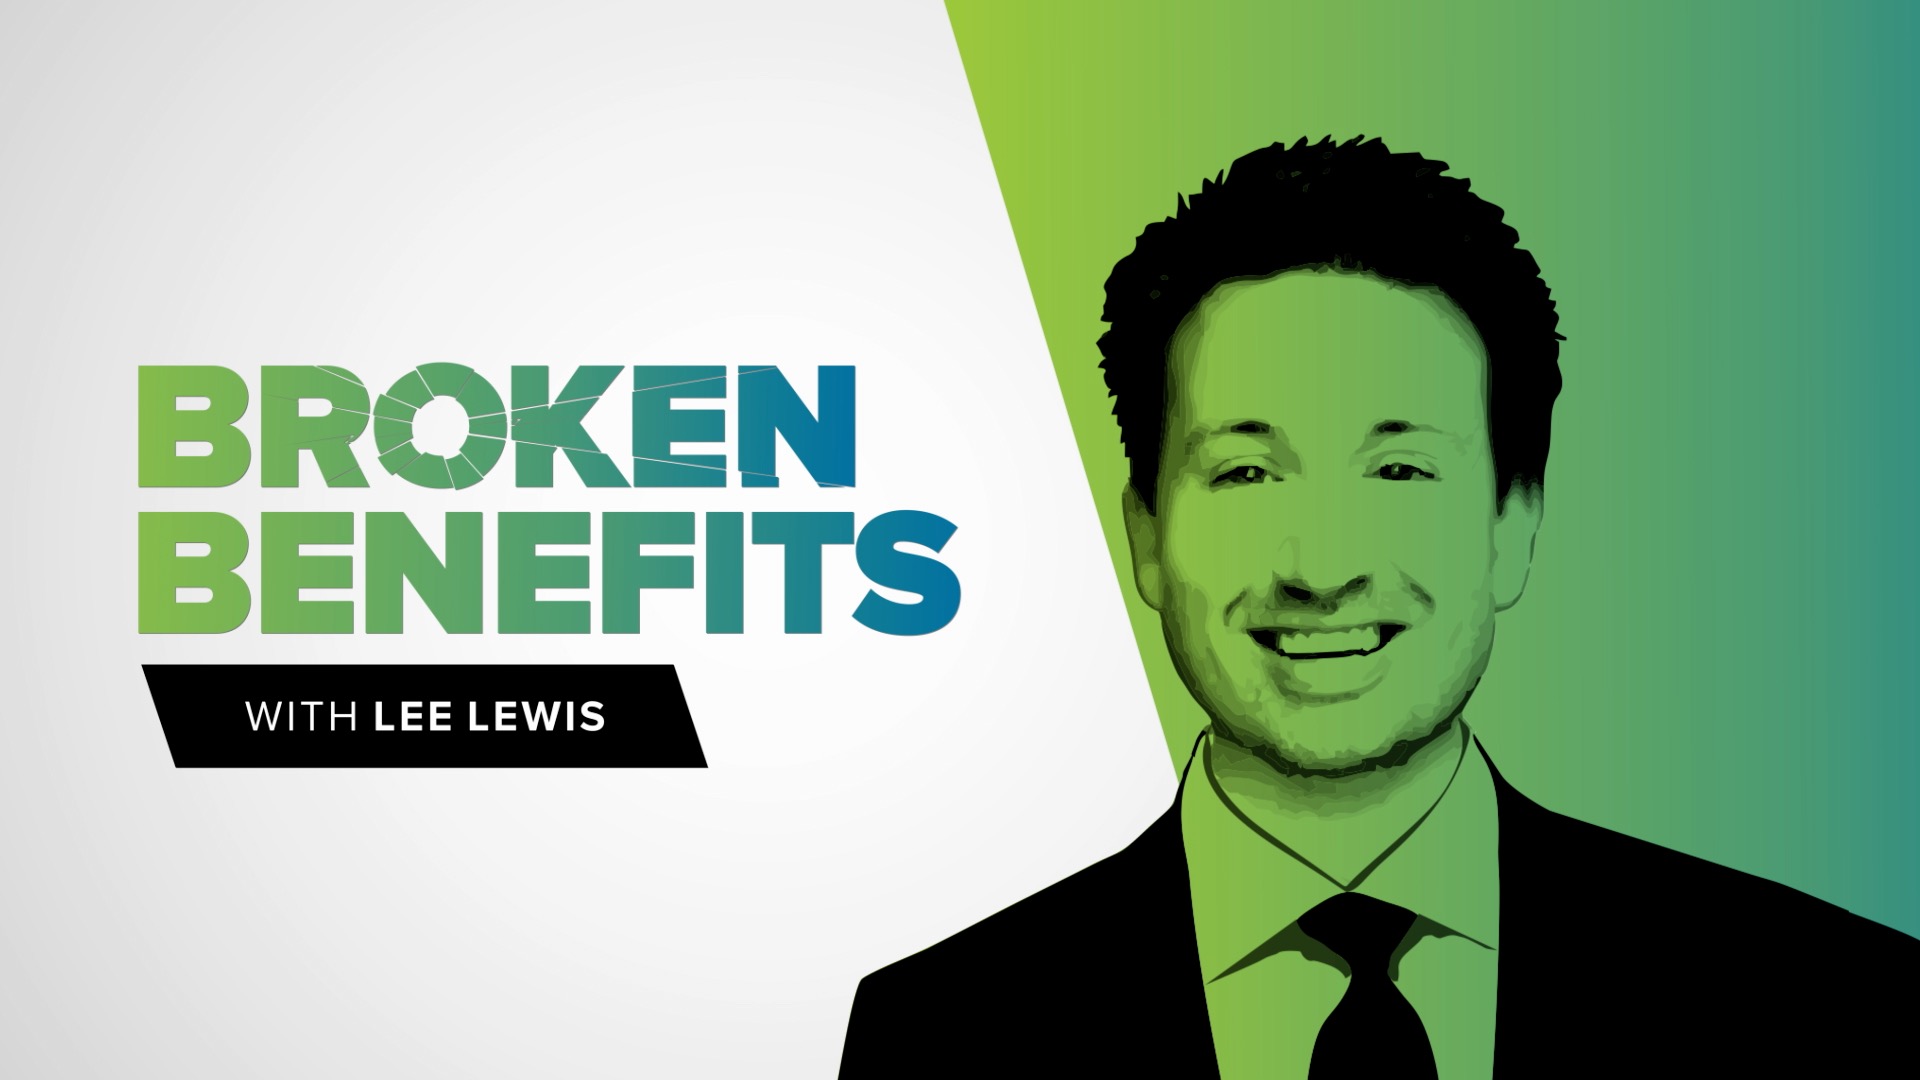 An image for the podcast "Broken Benefits" with Lee Lewis.